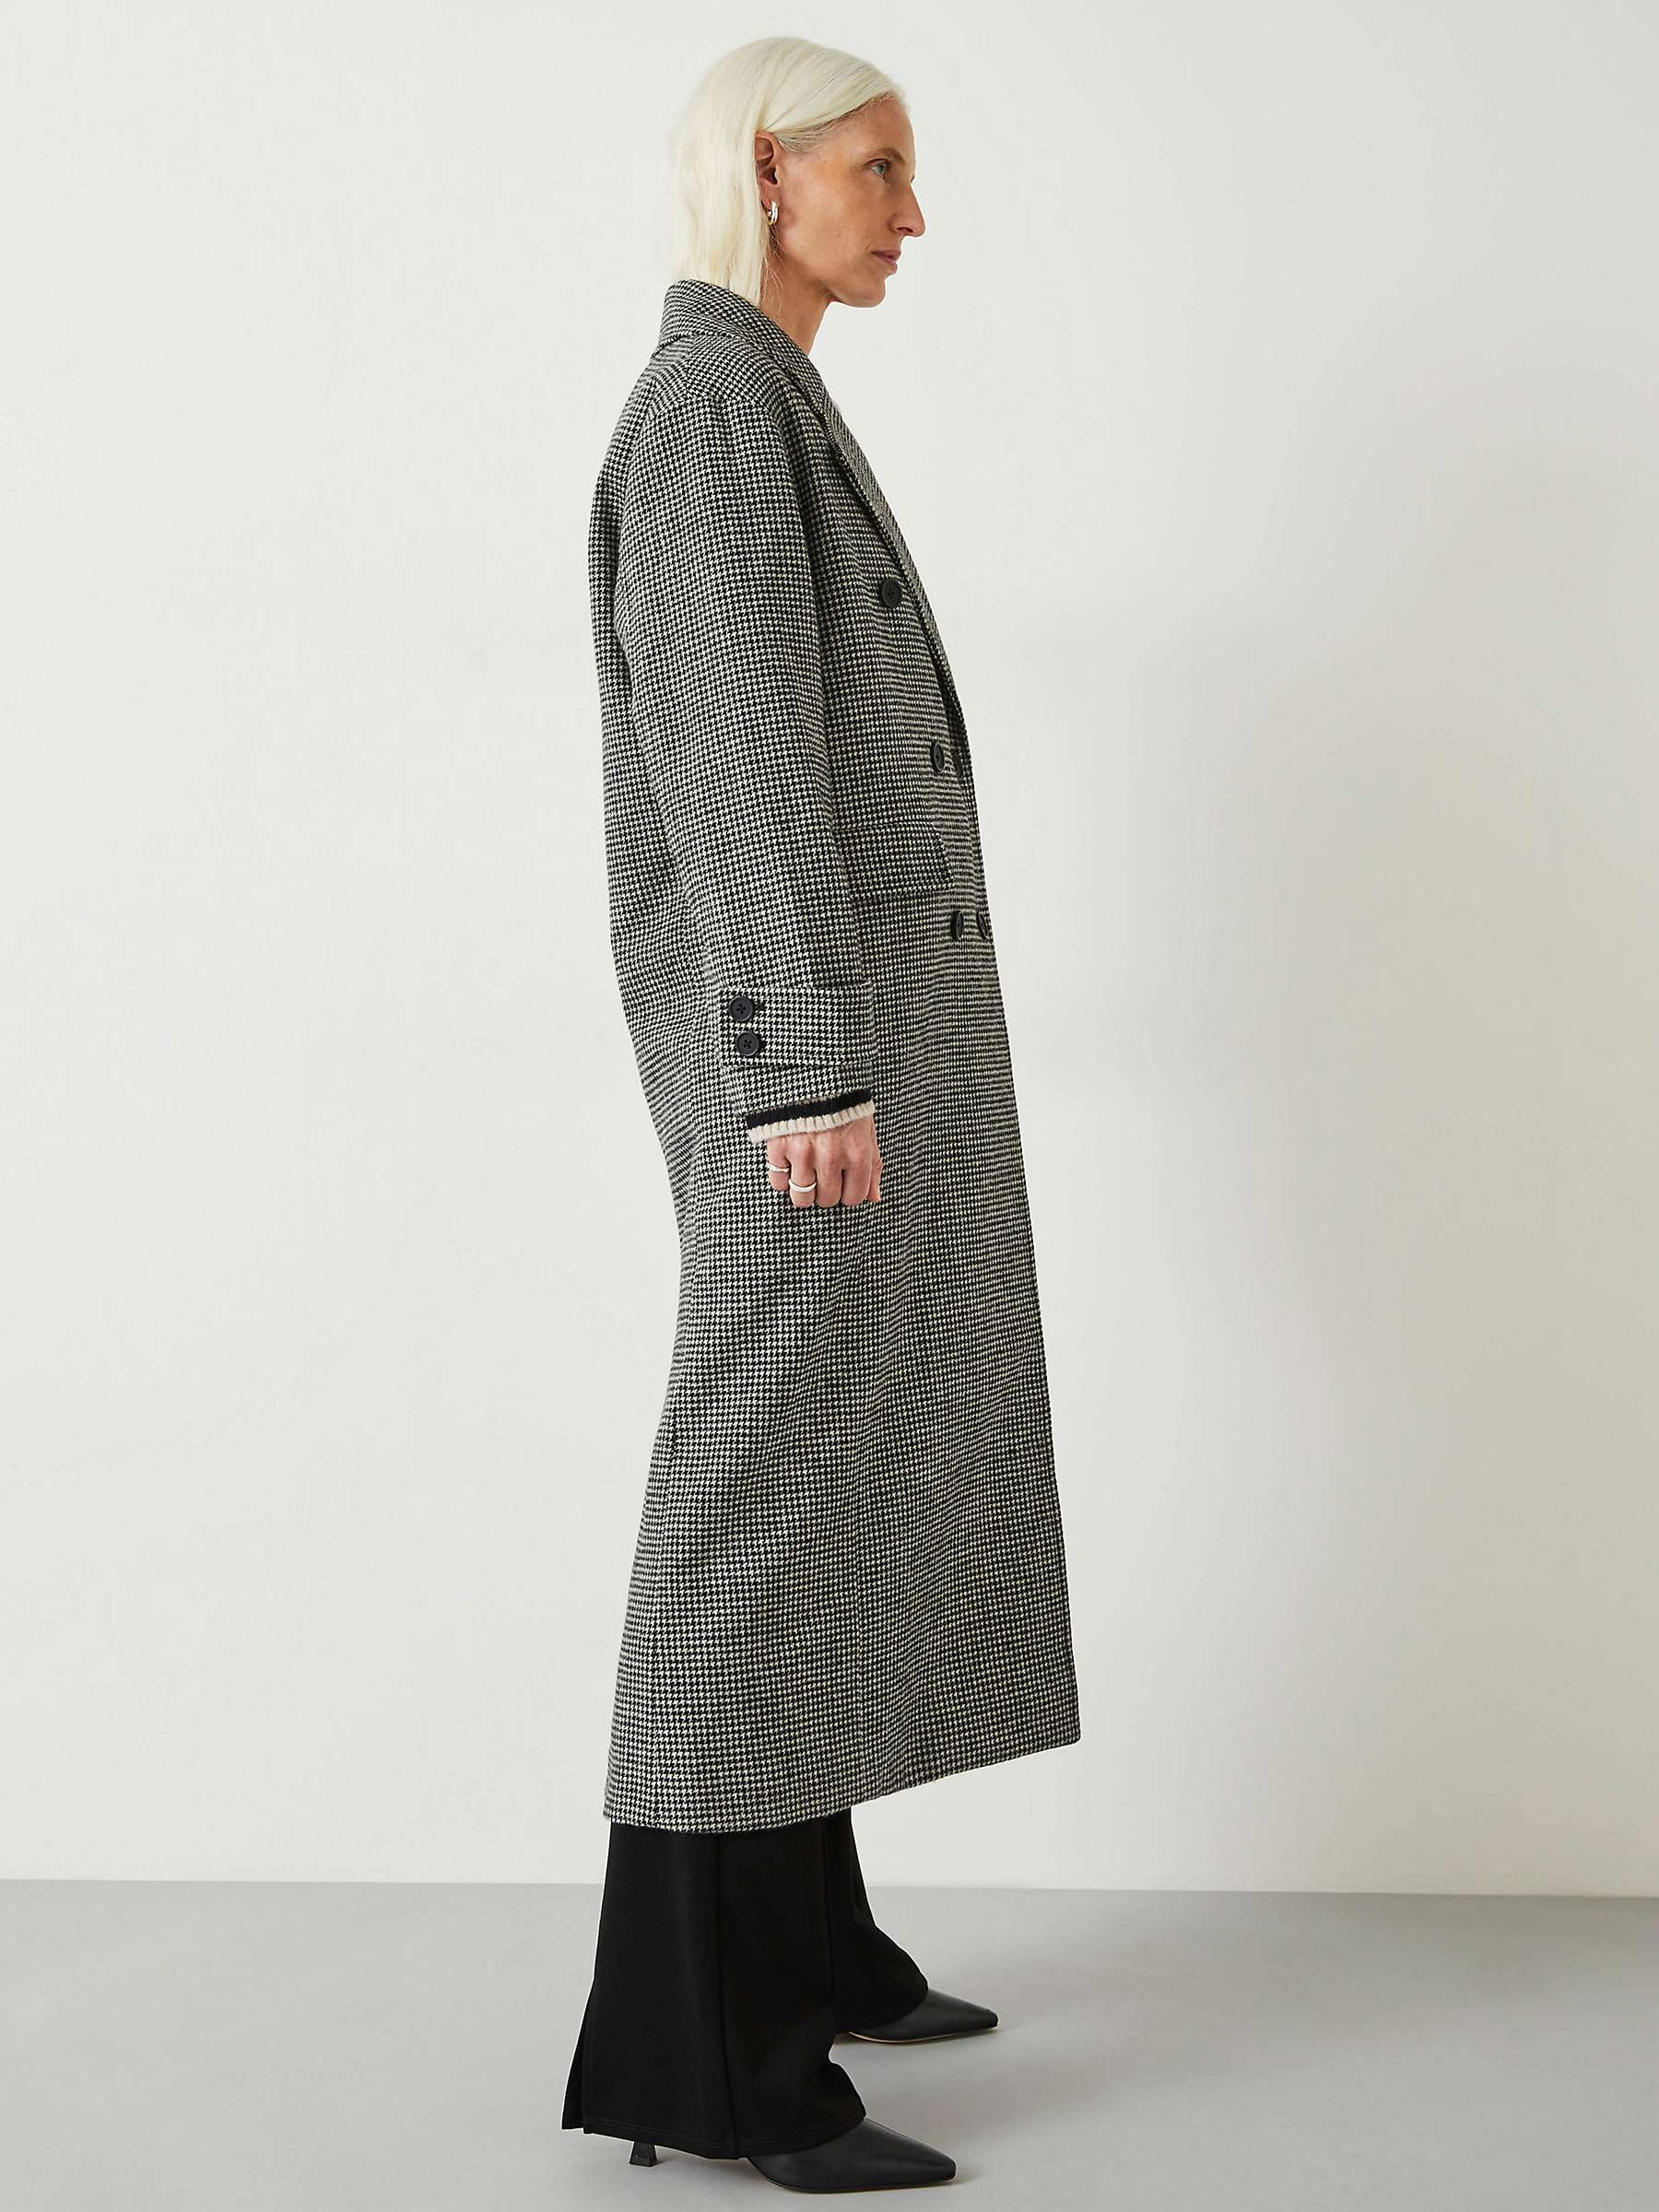 Buy HUSH Rose Double Breasted Houndstooth Coat, Black/White Online at johnlewis.com